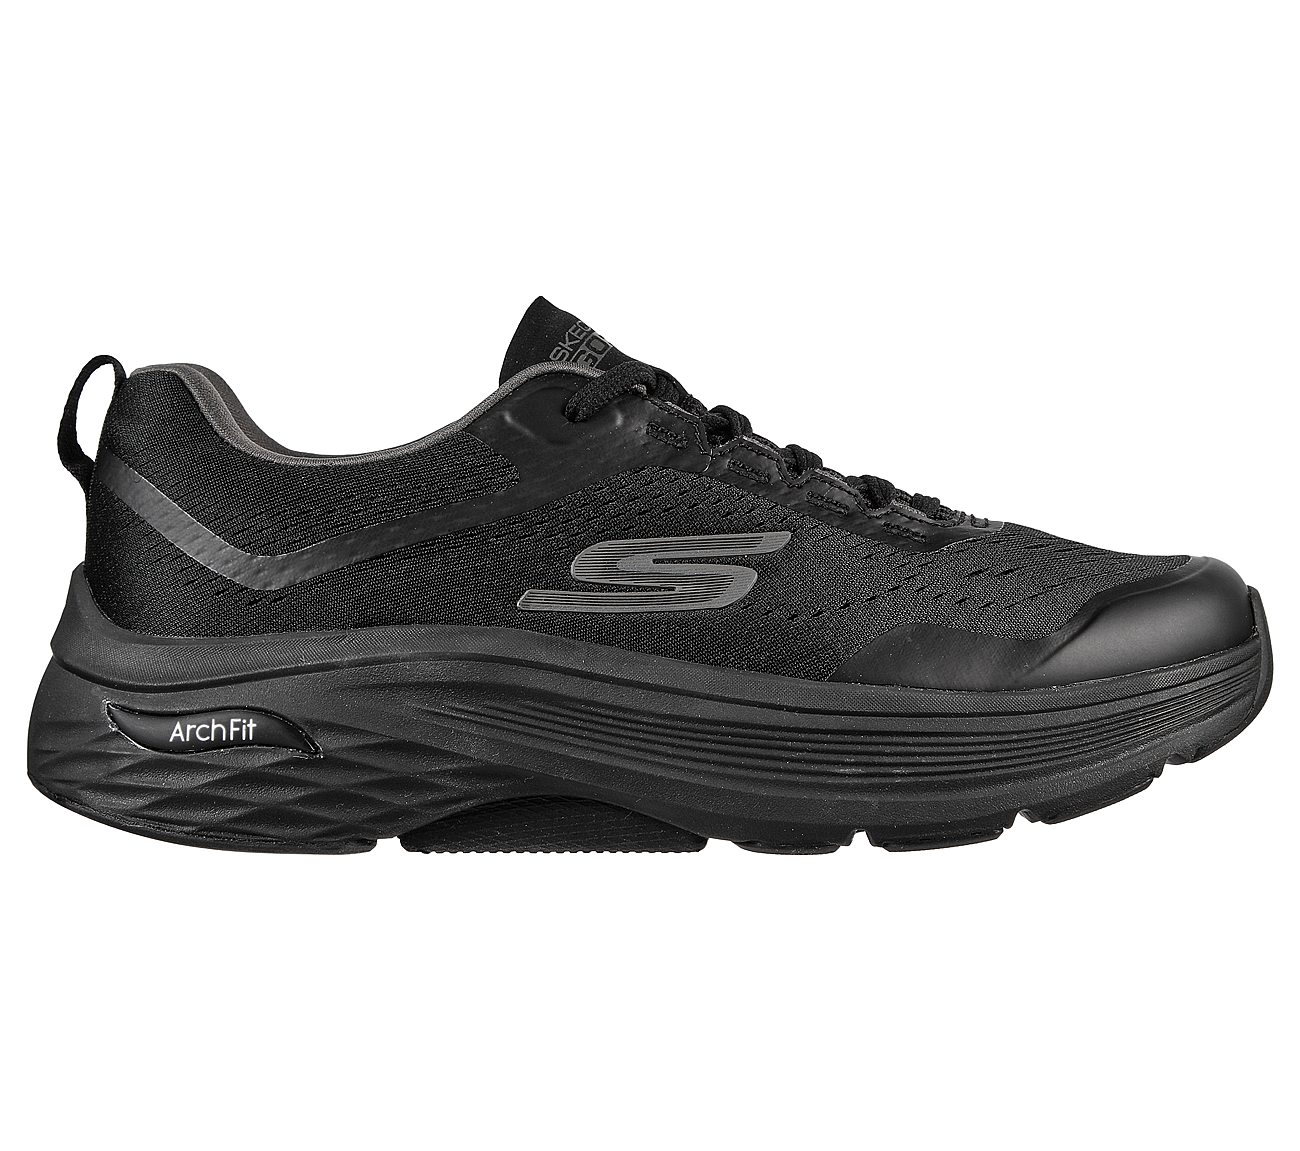 MAX CUSHIONING ARCH FIT, BBLACK Footwear Right View